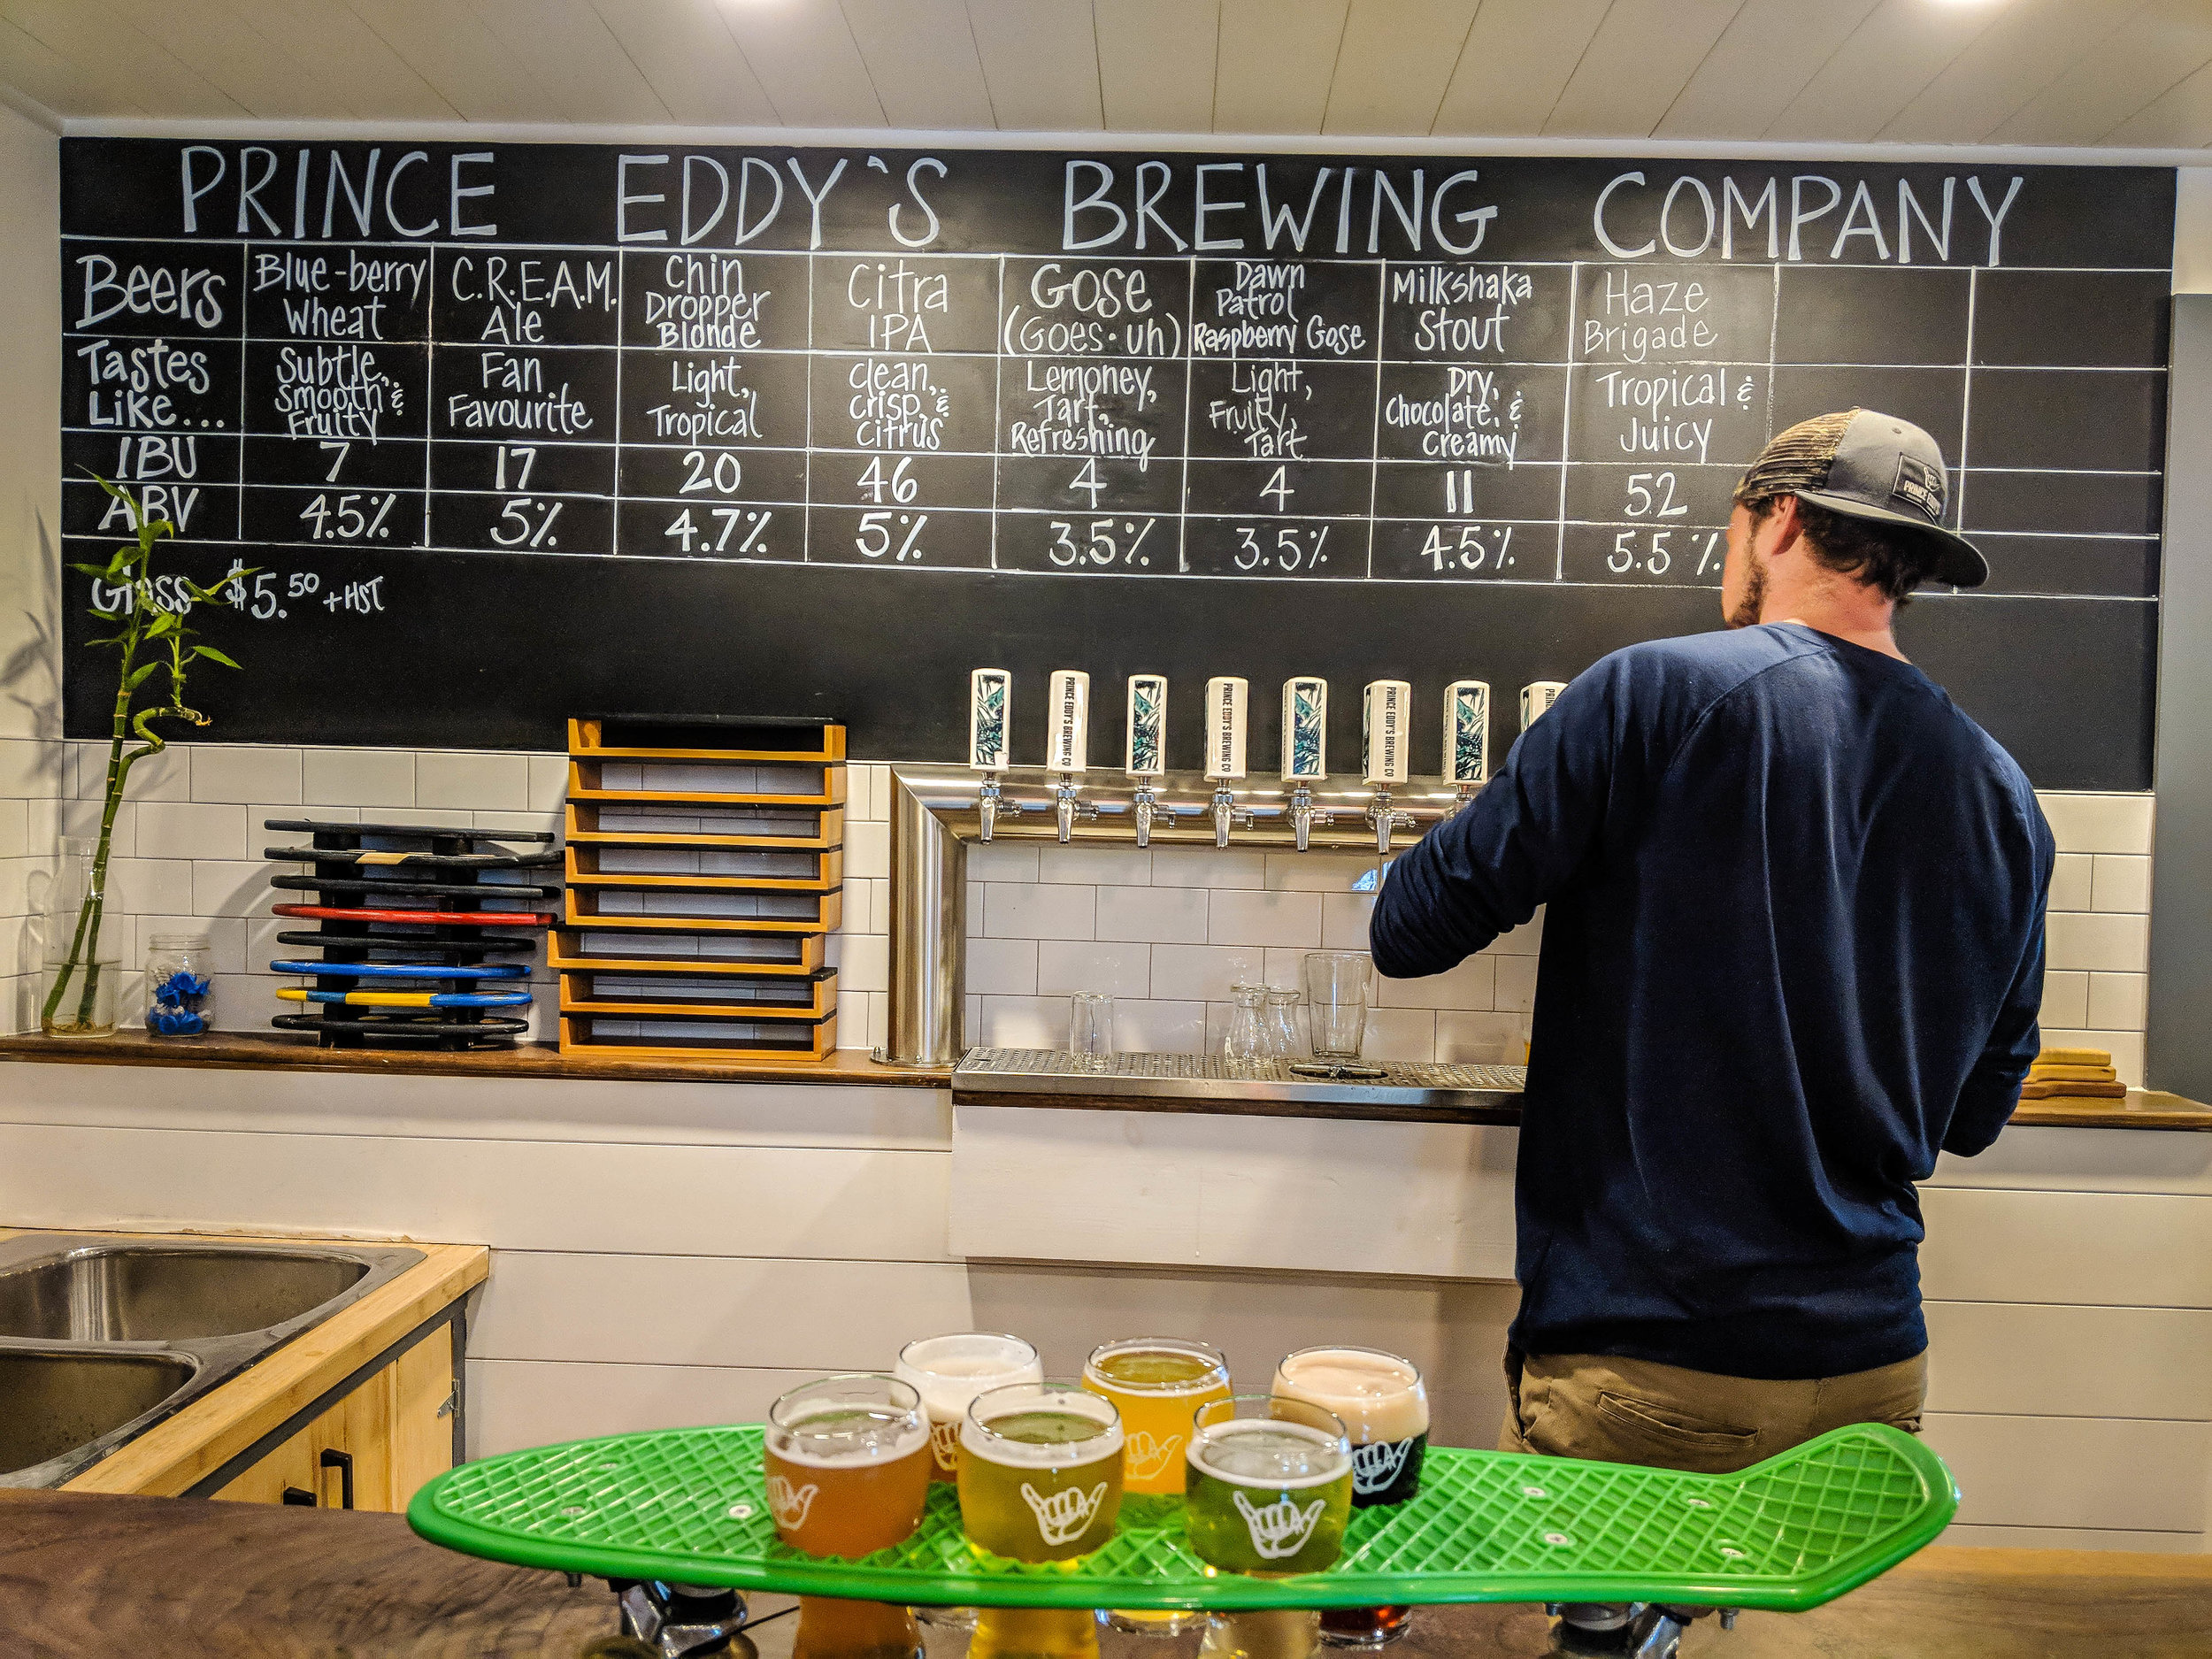 Prince Eddy's Brewery - Things to do in Prince Edward County